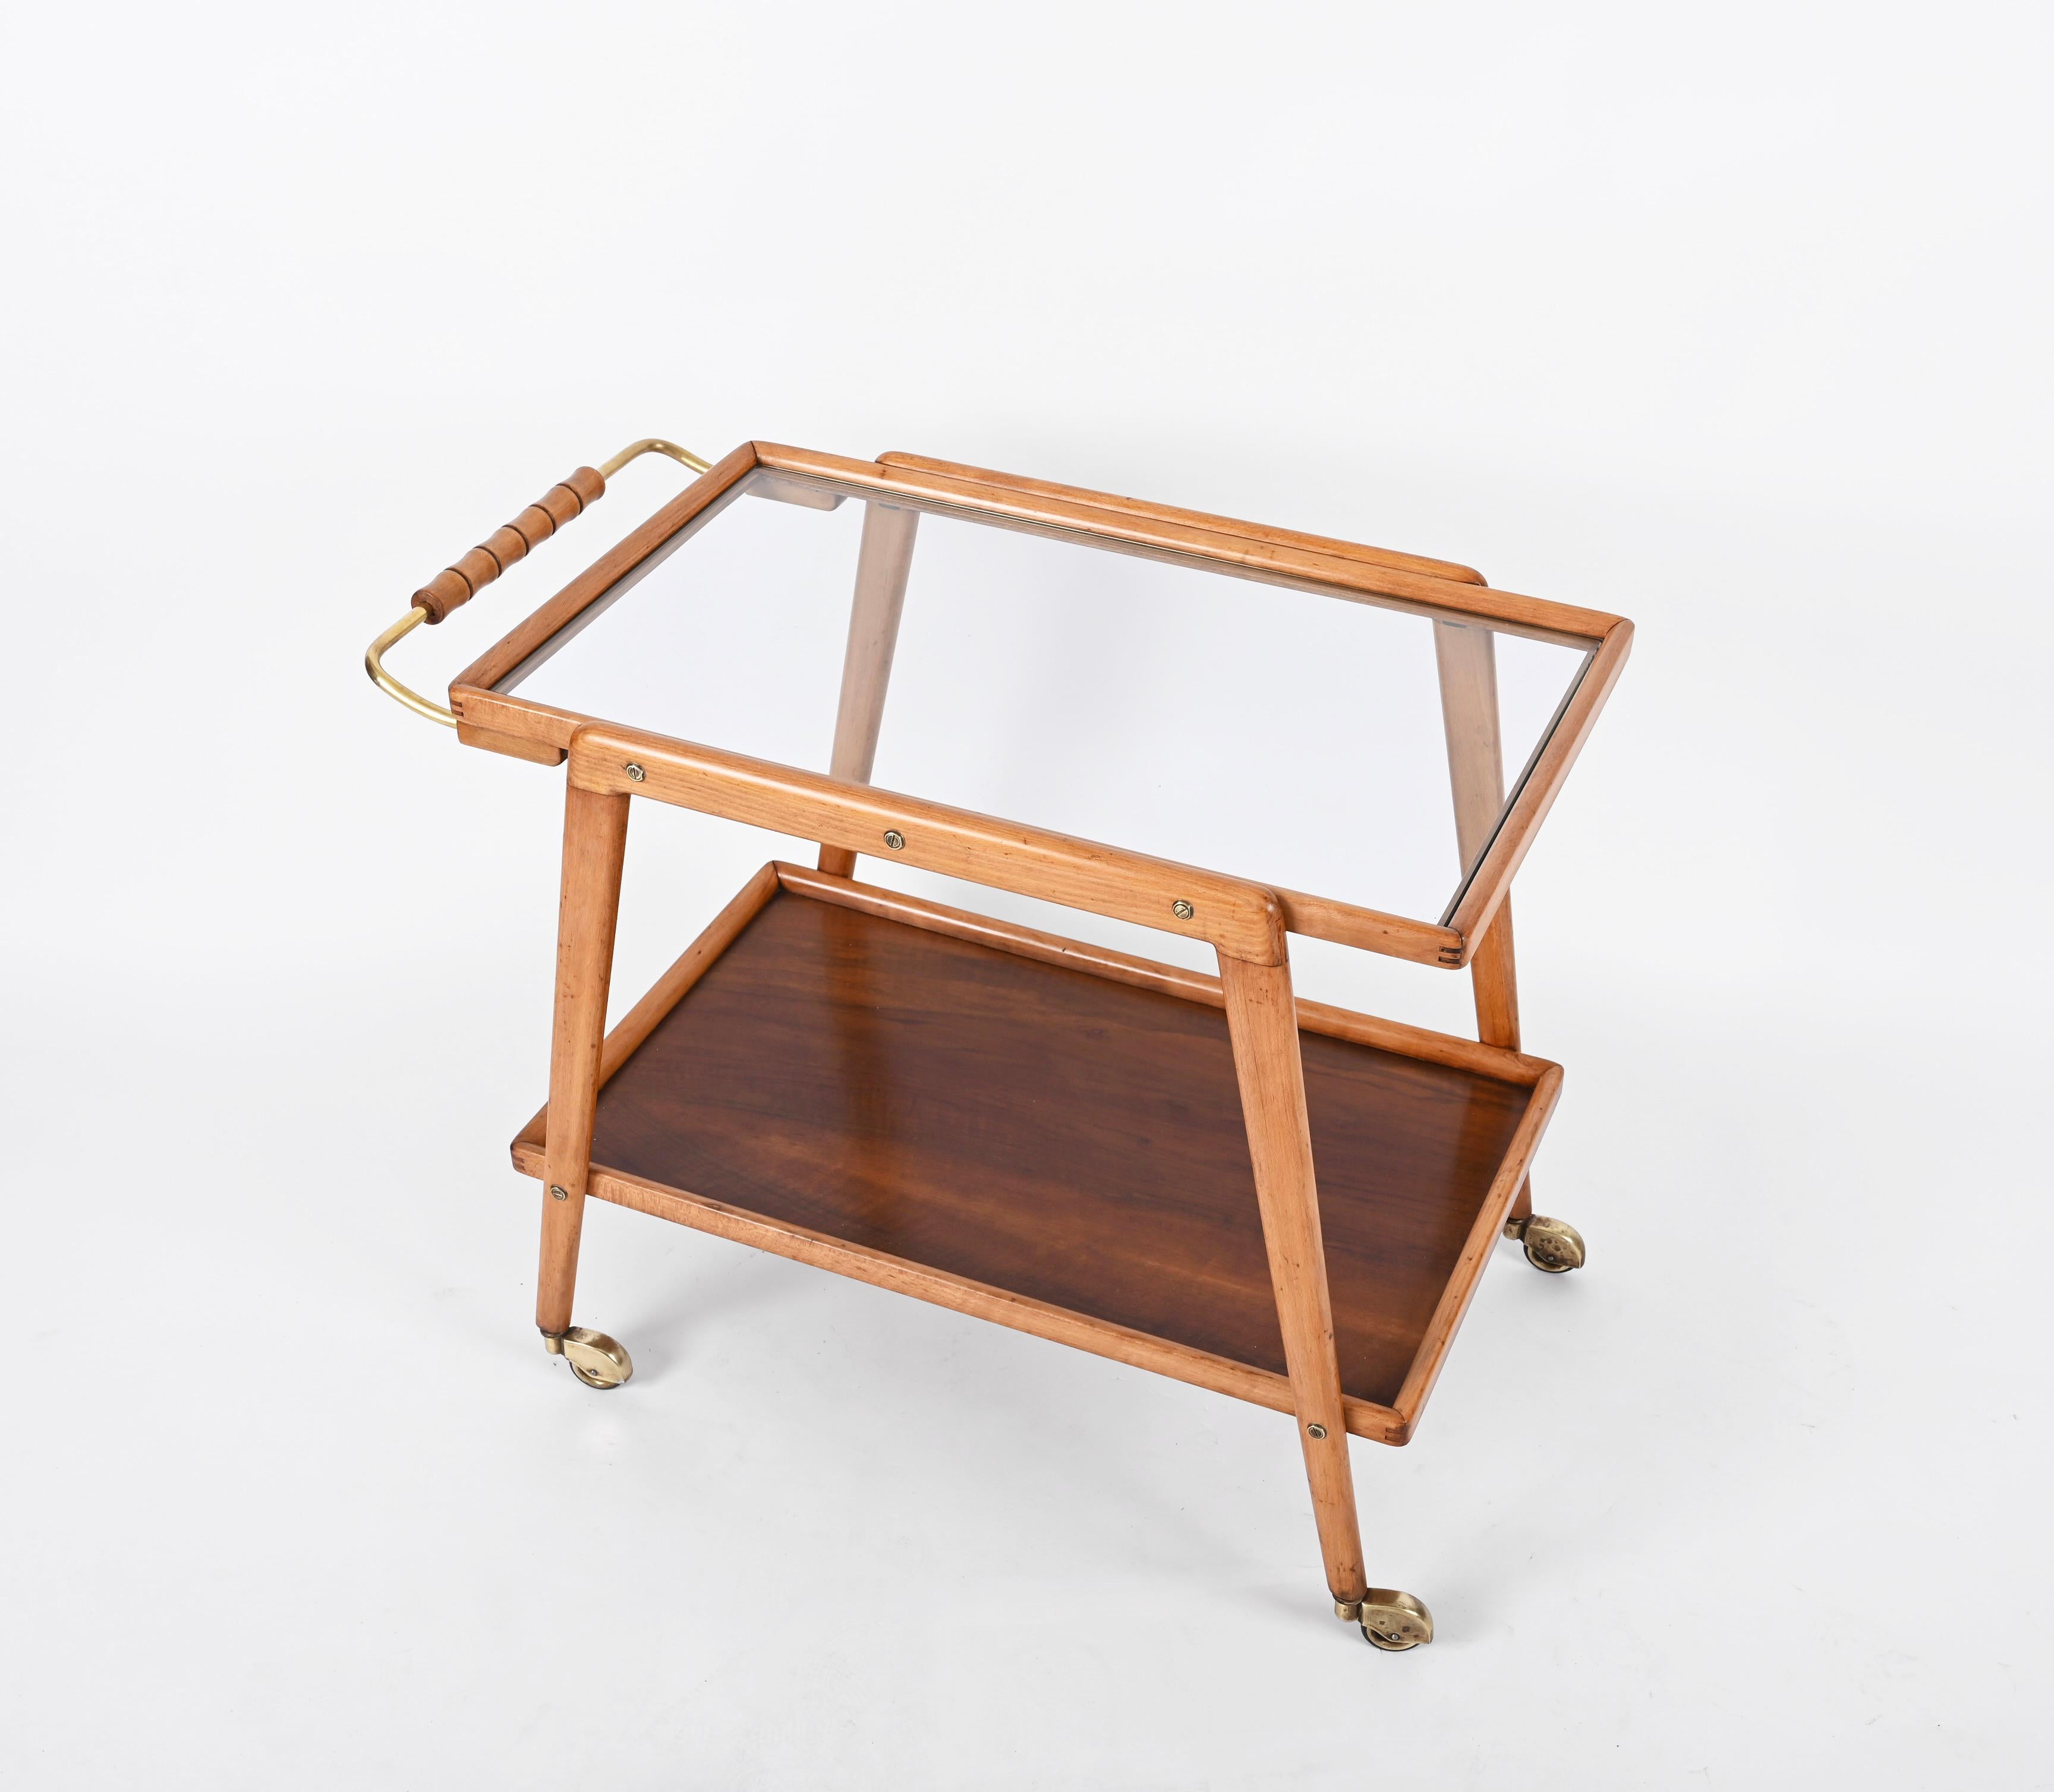 Crystal Midcentury Bar Cart in Beech, Brass and Glass, Cesare Lacca, Italy, 1960s For Sale